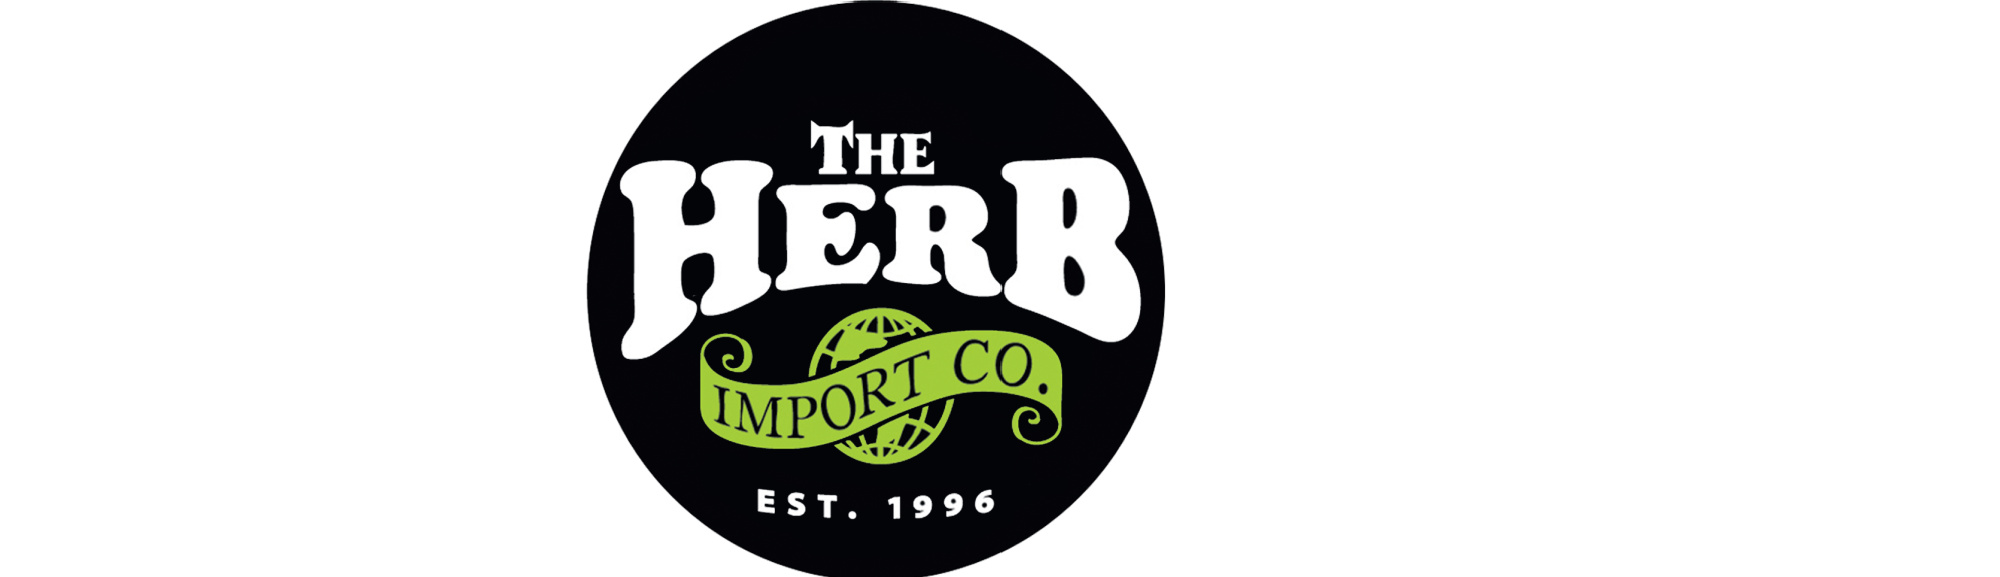 image of herb import company in new orleans la